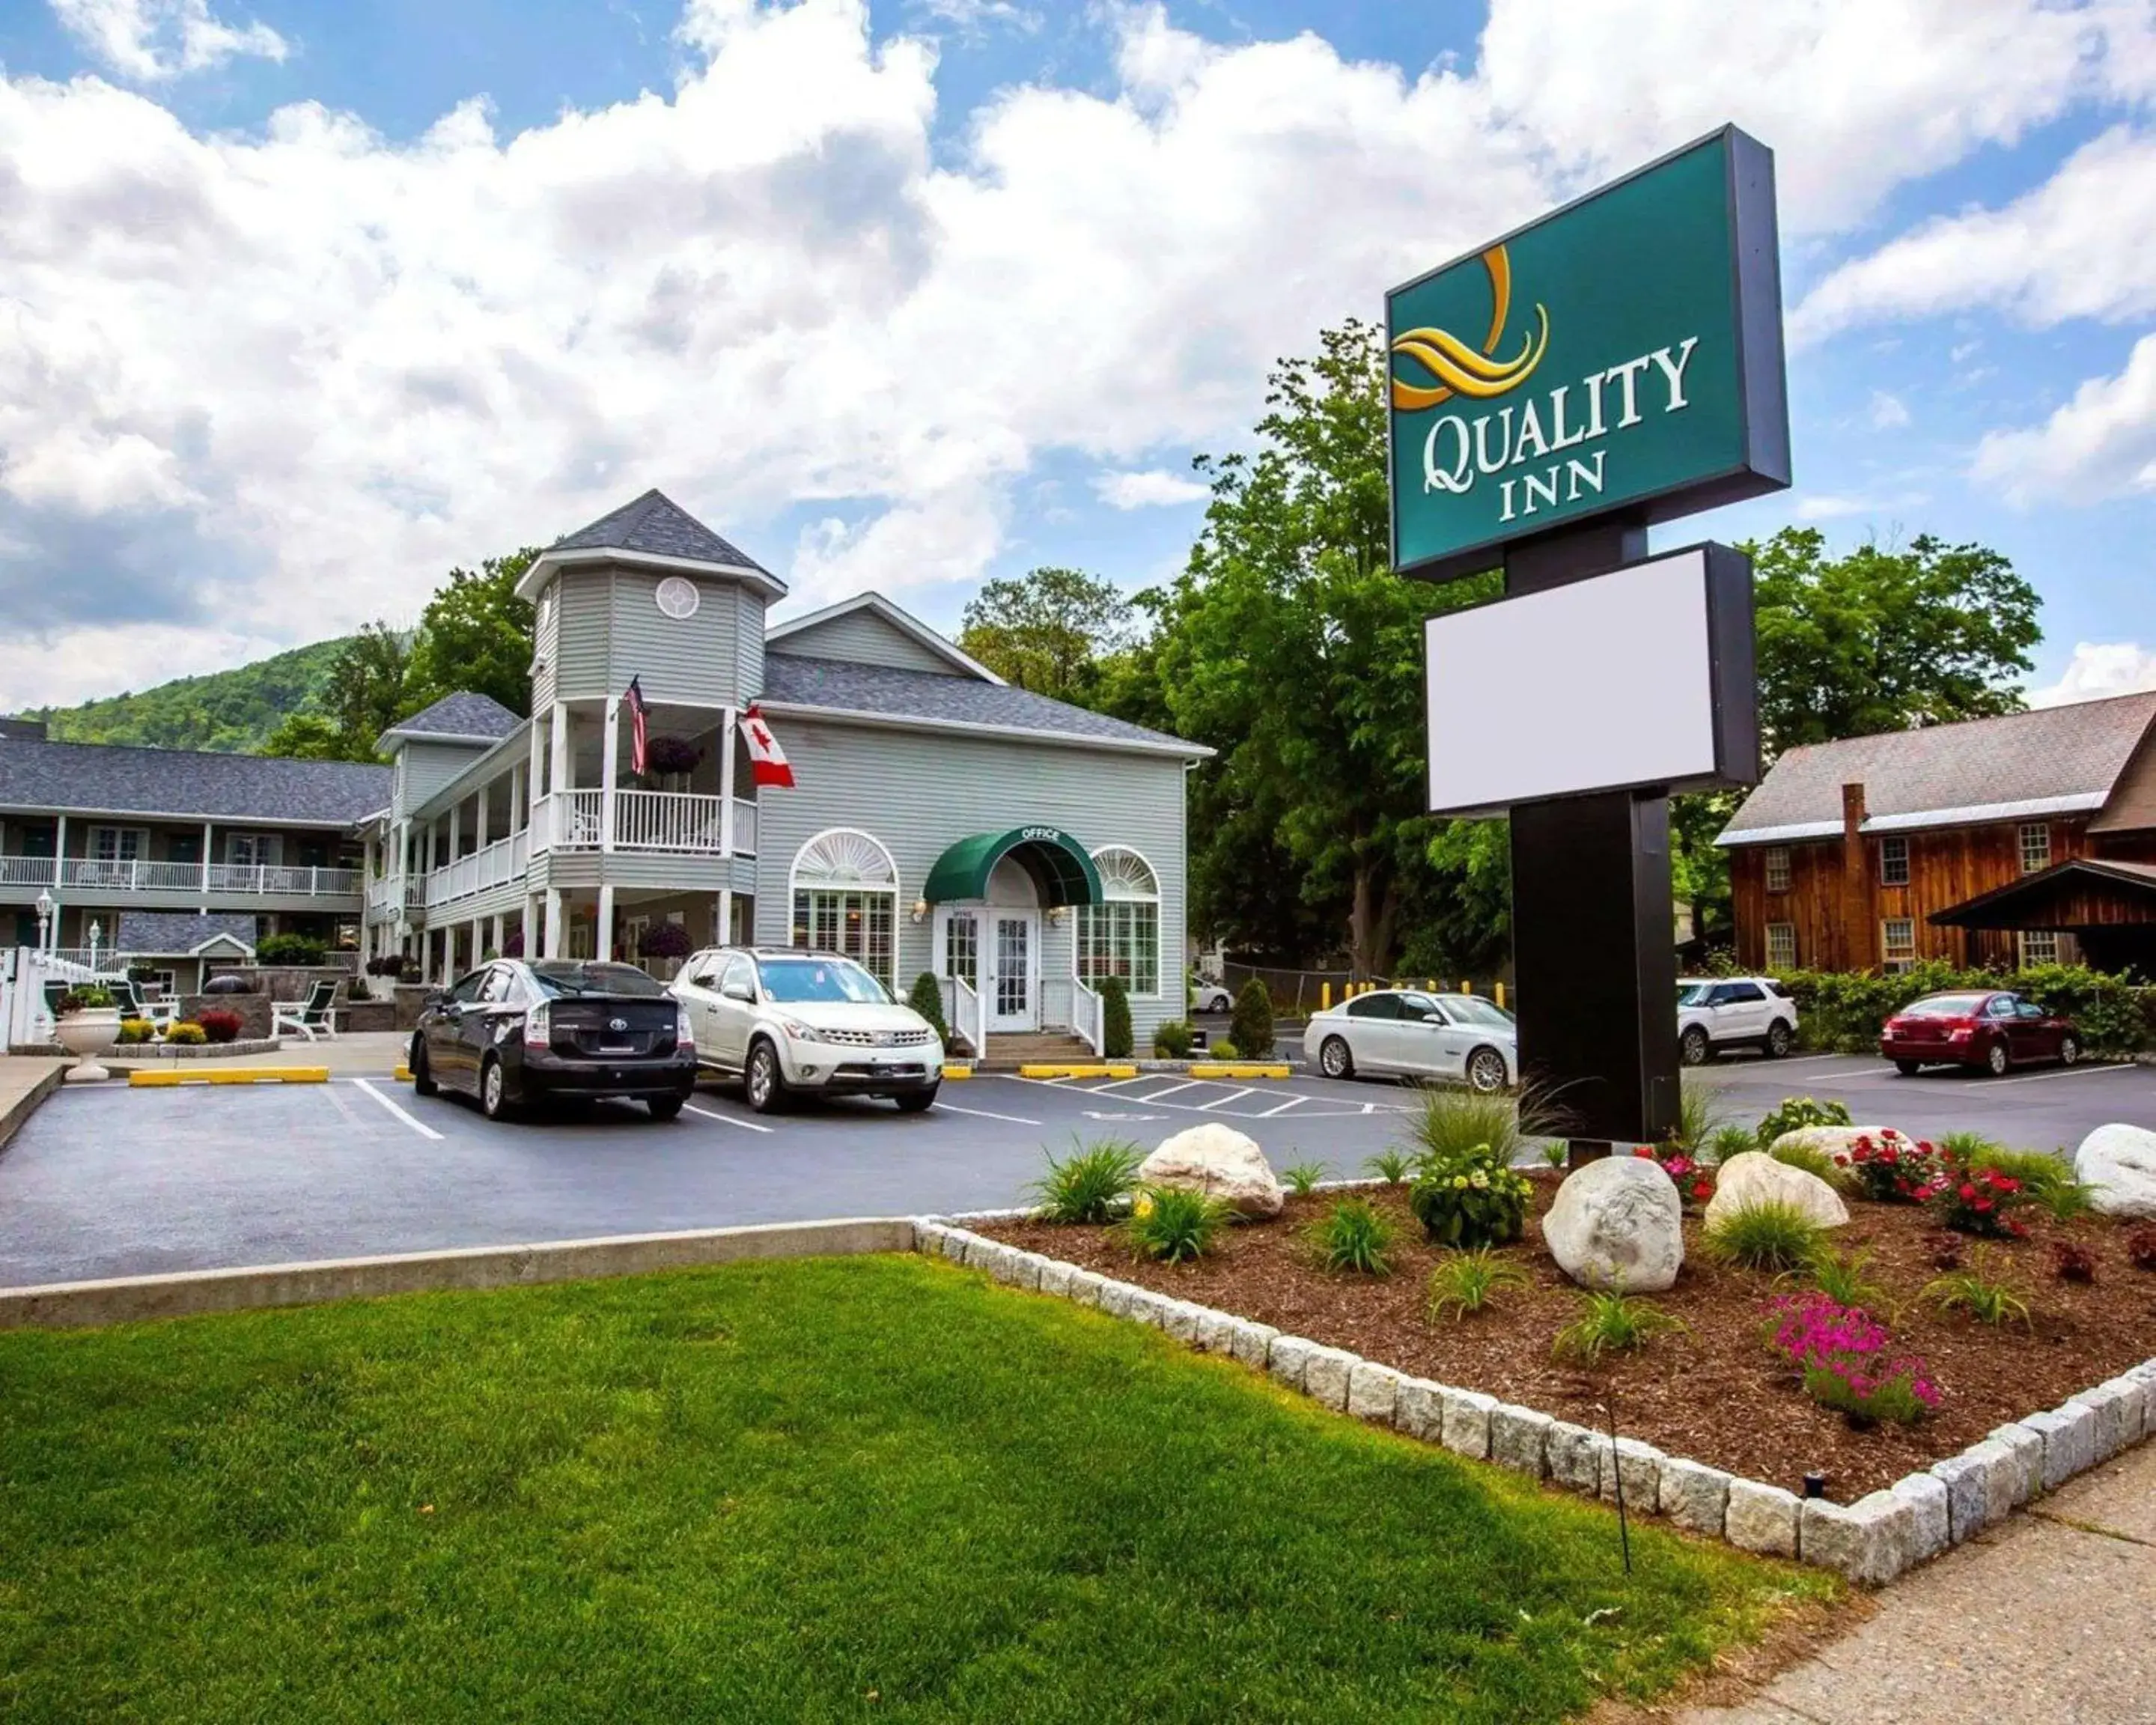 Property Building in Quality Inn Lake George